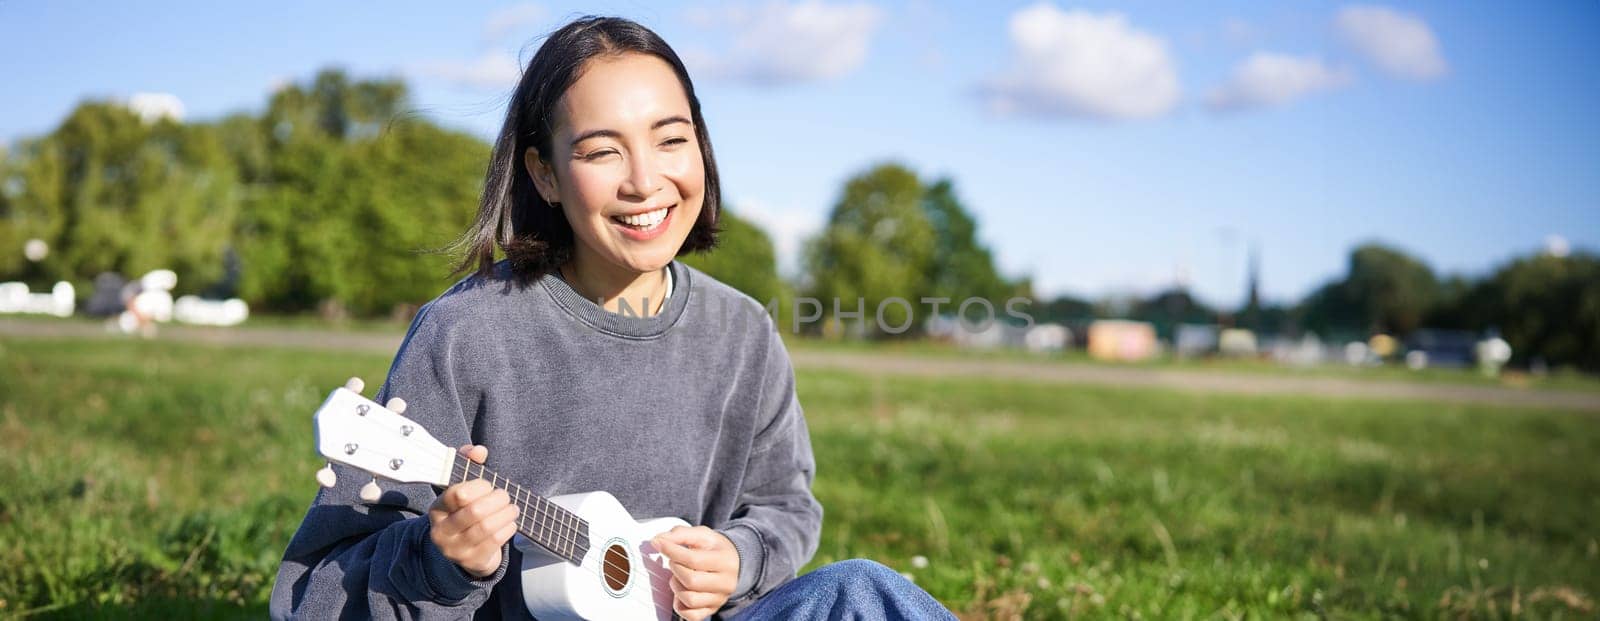 Carefree asian girl singing and playing ukulele in park, sitting on grass, musician relaxing on her free time outdoors.